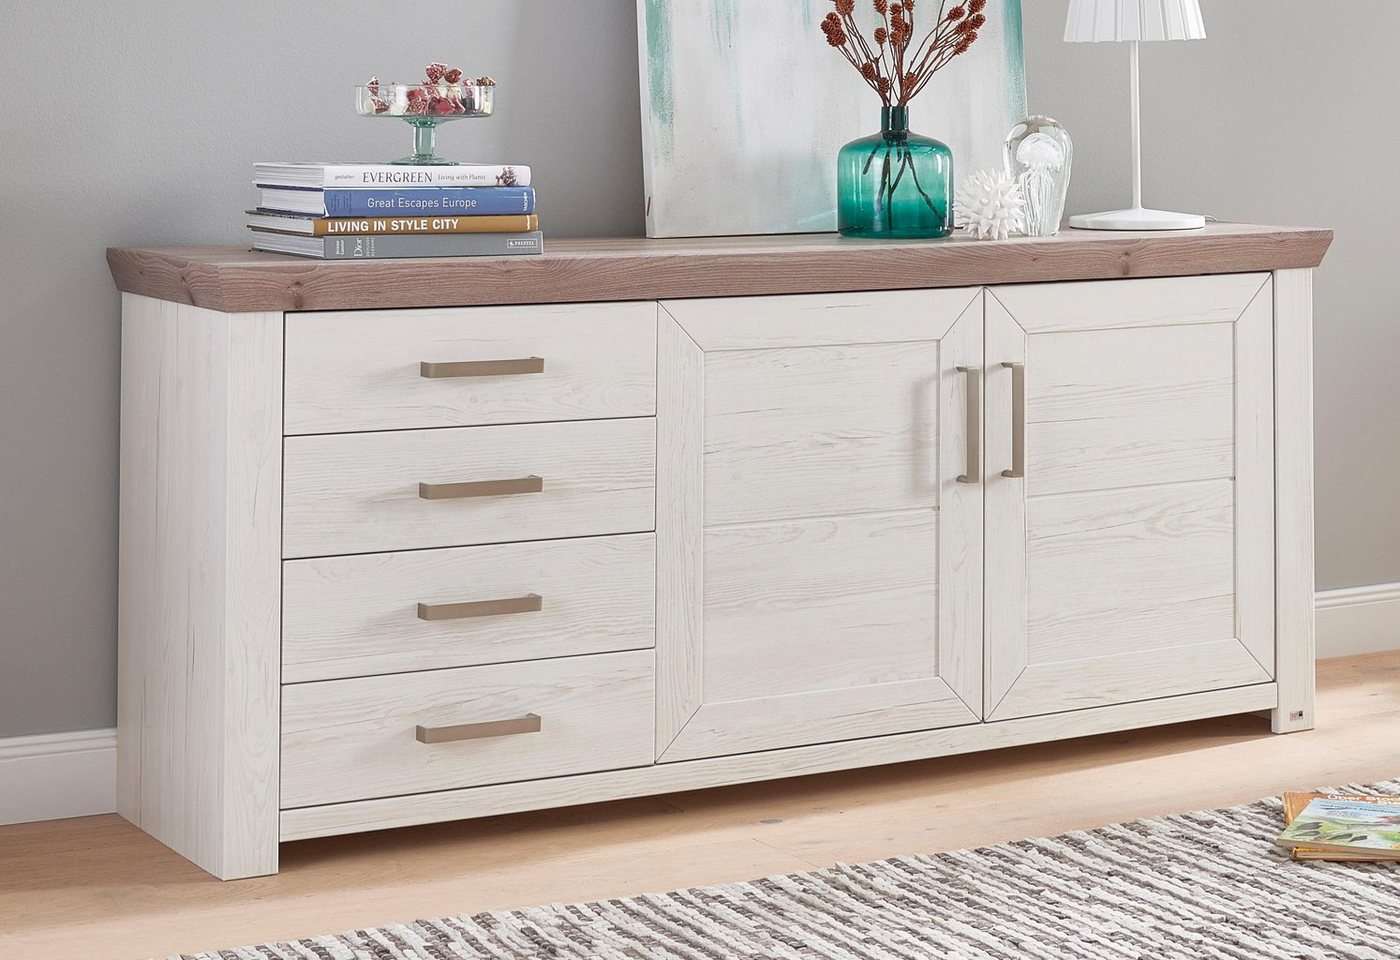 set one by Musterring Sideboard york, Typ 51, Breite 184 cm von set one by Musterring